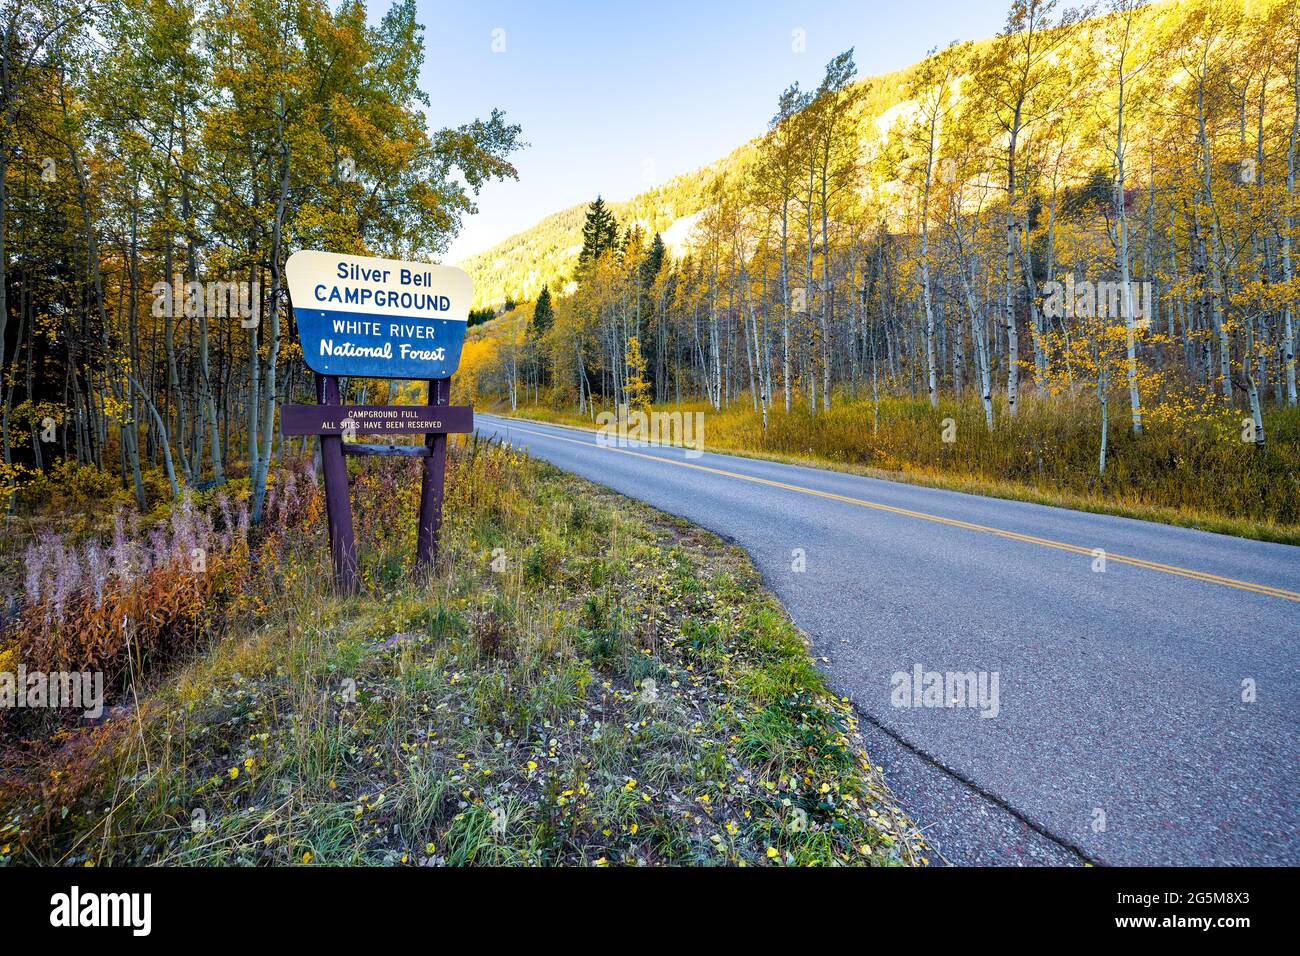 Maroon Bells sign for Silver Bell Campground and white river national forest in Aspen, Colorado rocky mountain in autumn fall colorful season Stock Photo